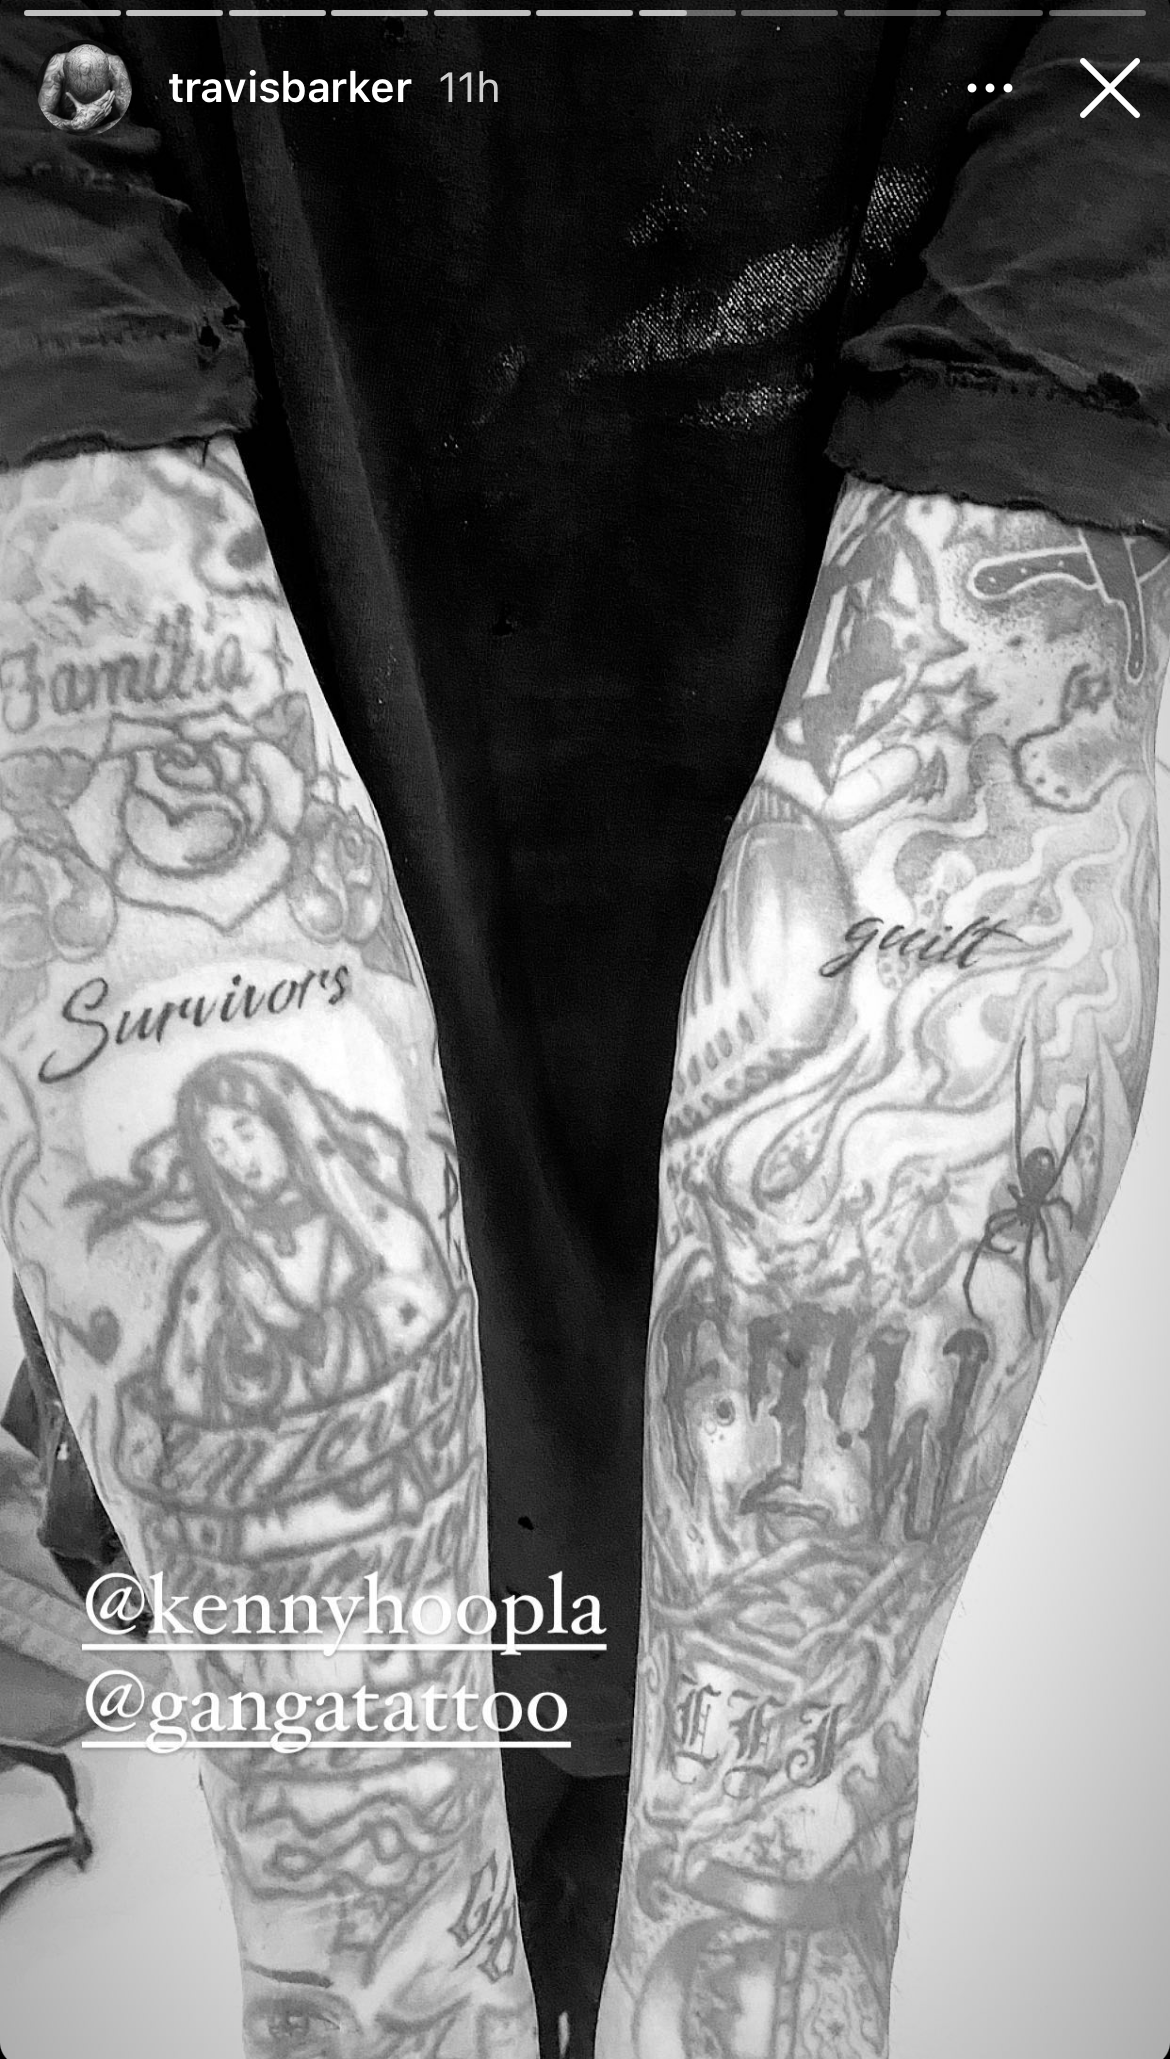 Travis Barker Gets New Dont Trust Anyone Tattoo on His Neck